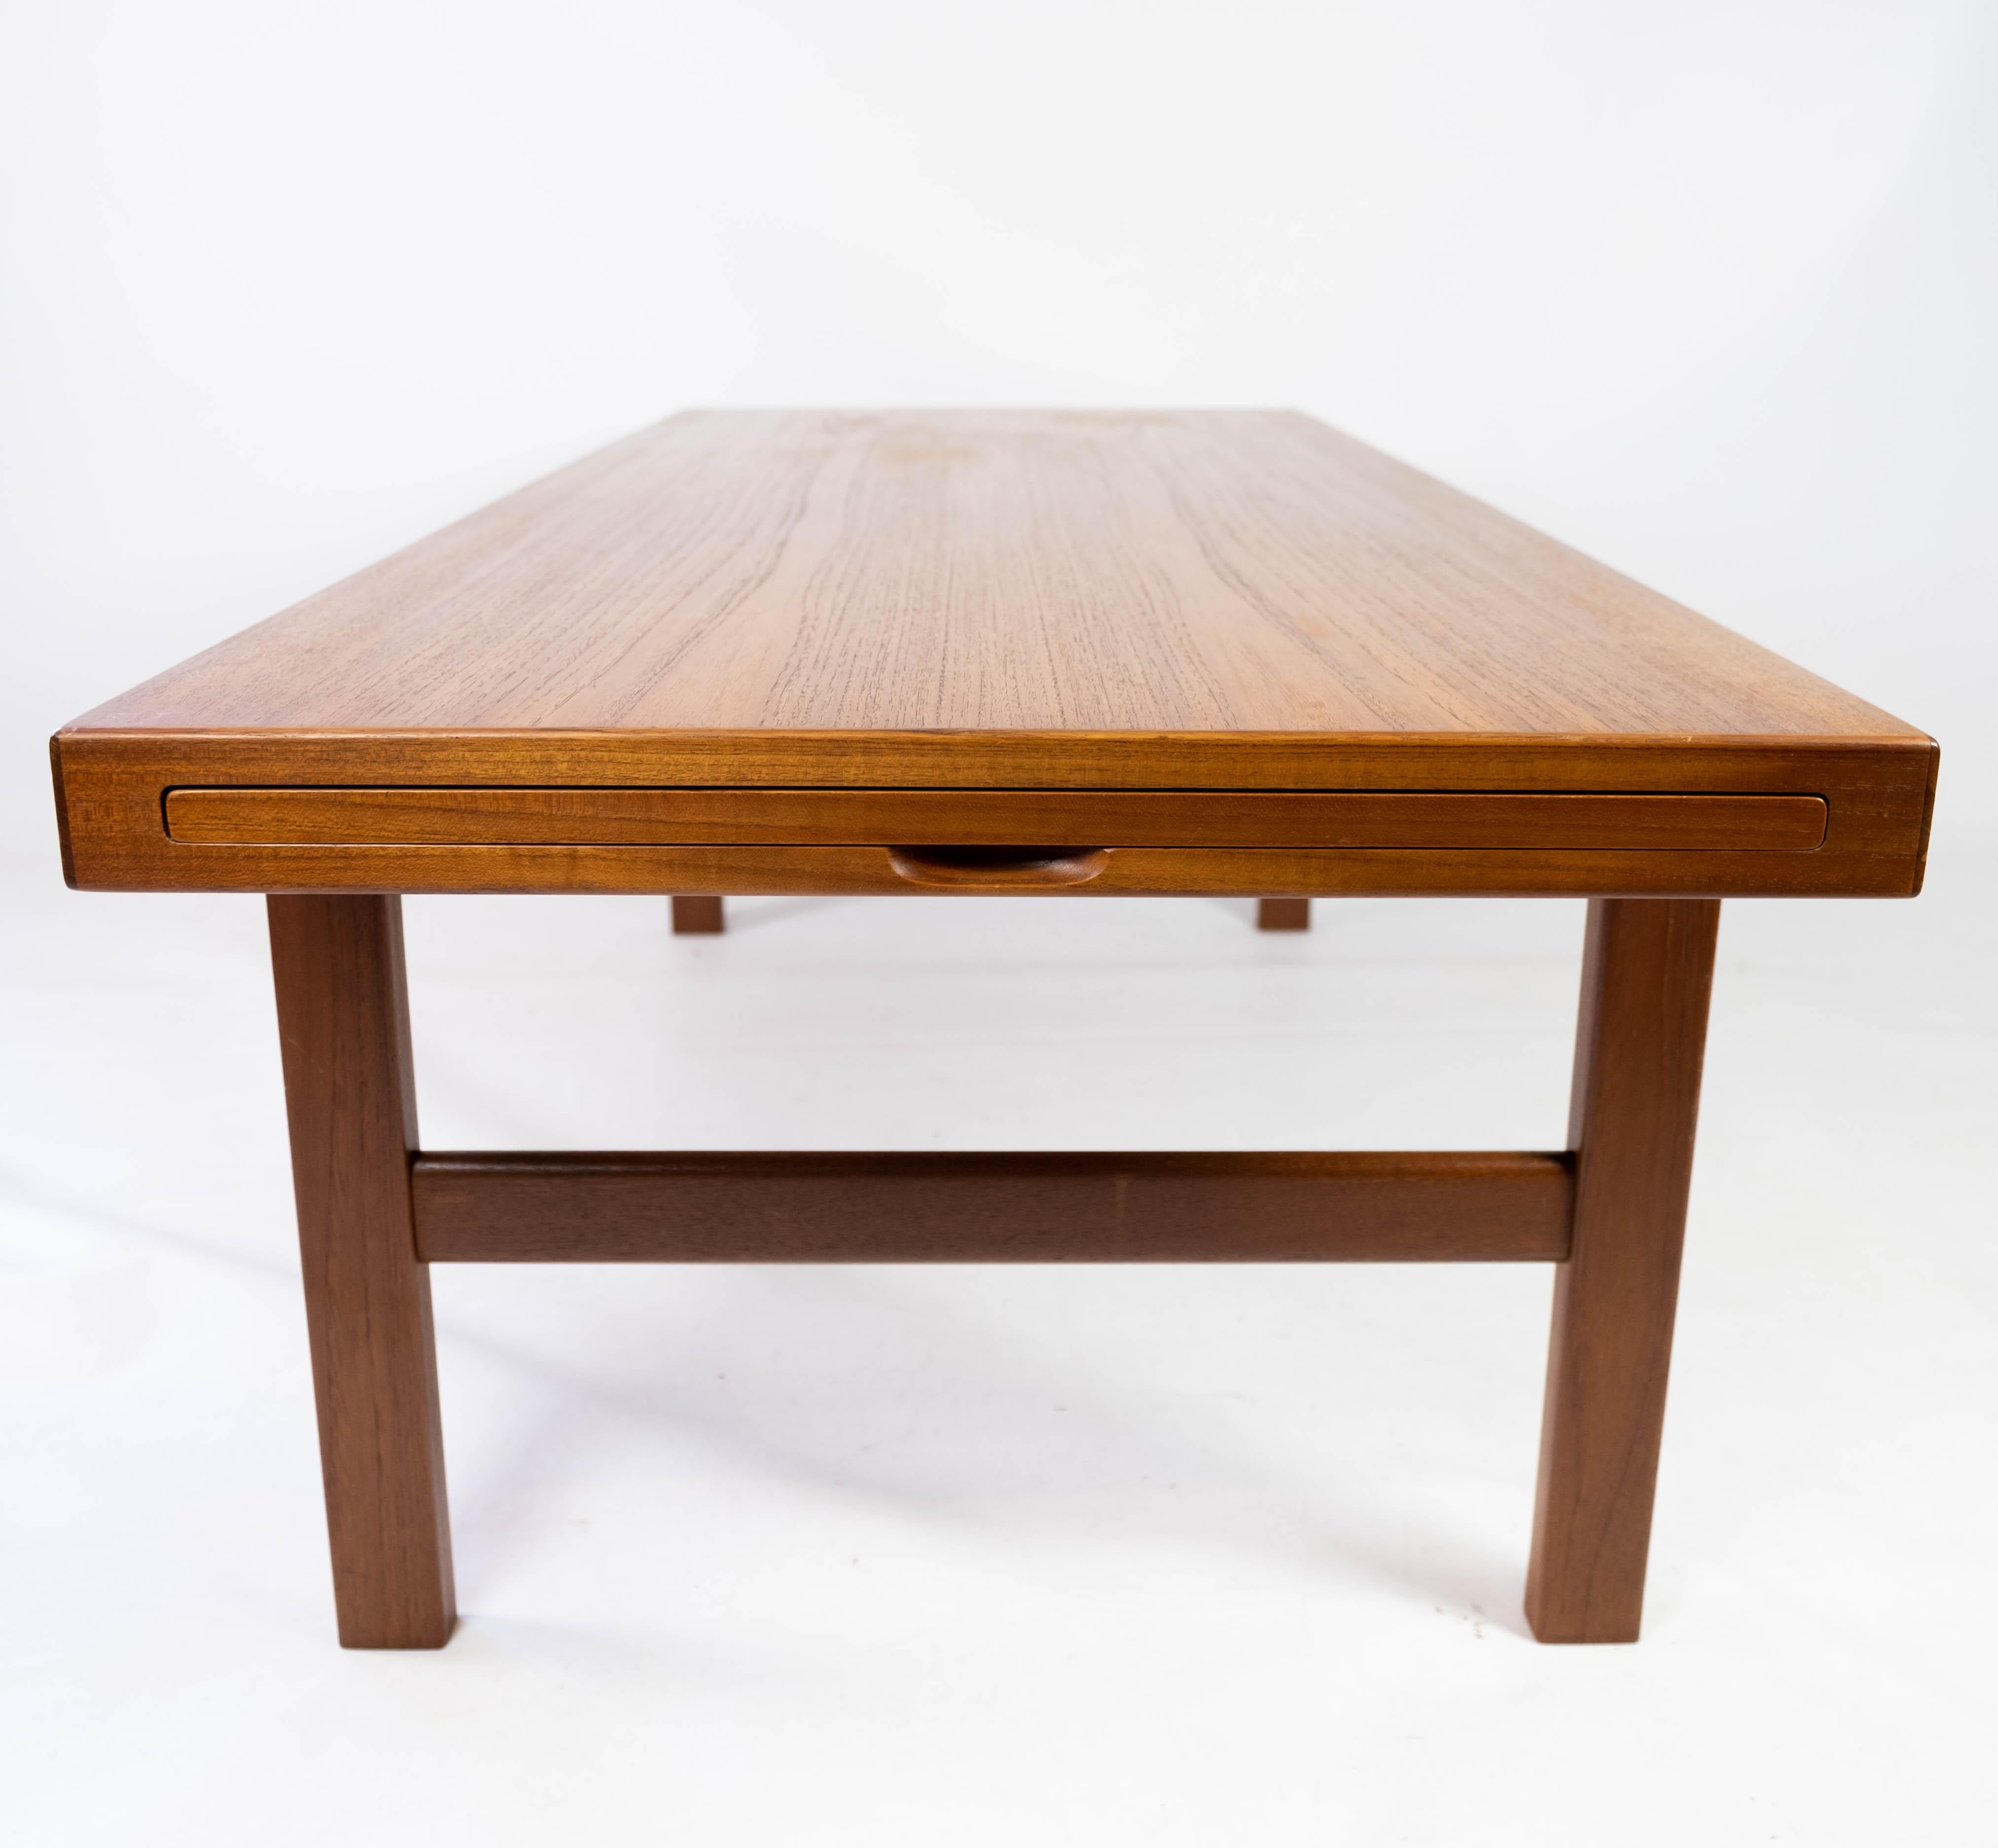 Coffee Table Made In Teak With Extension Plate, Danish Design From 1960s For Sale 3